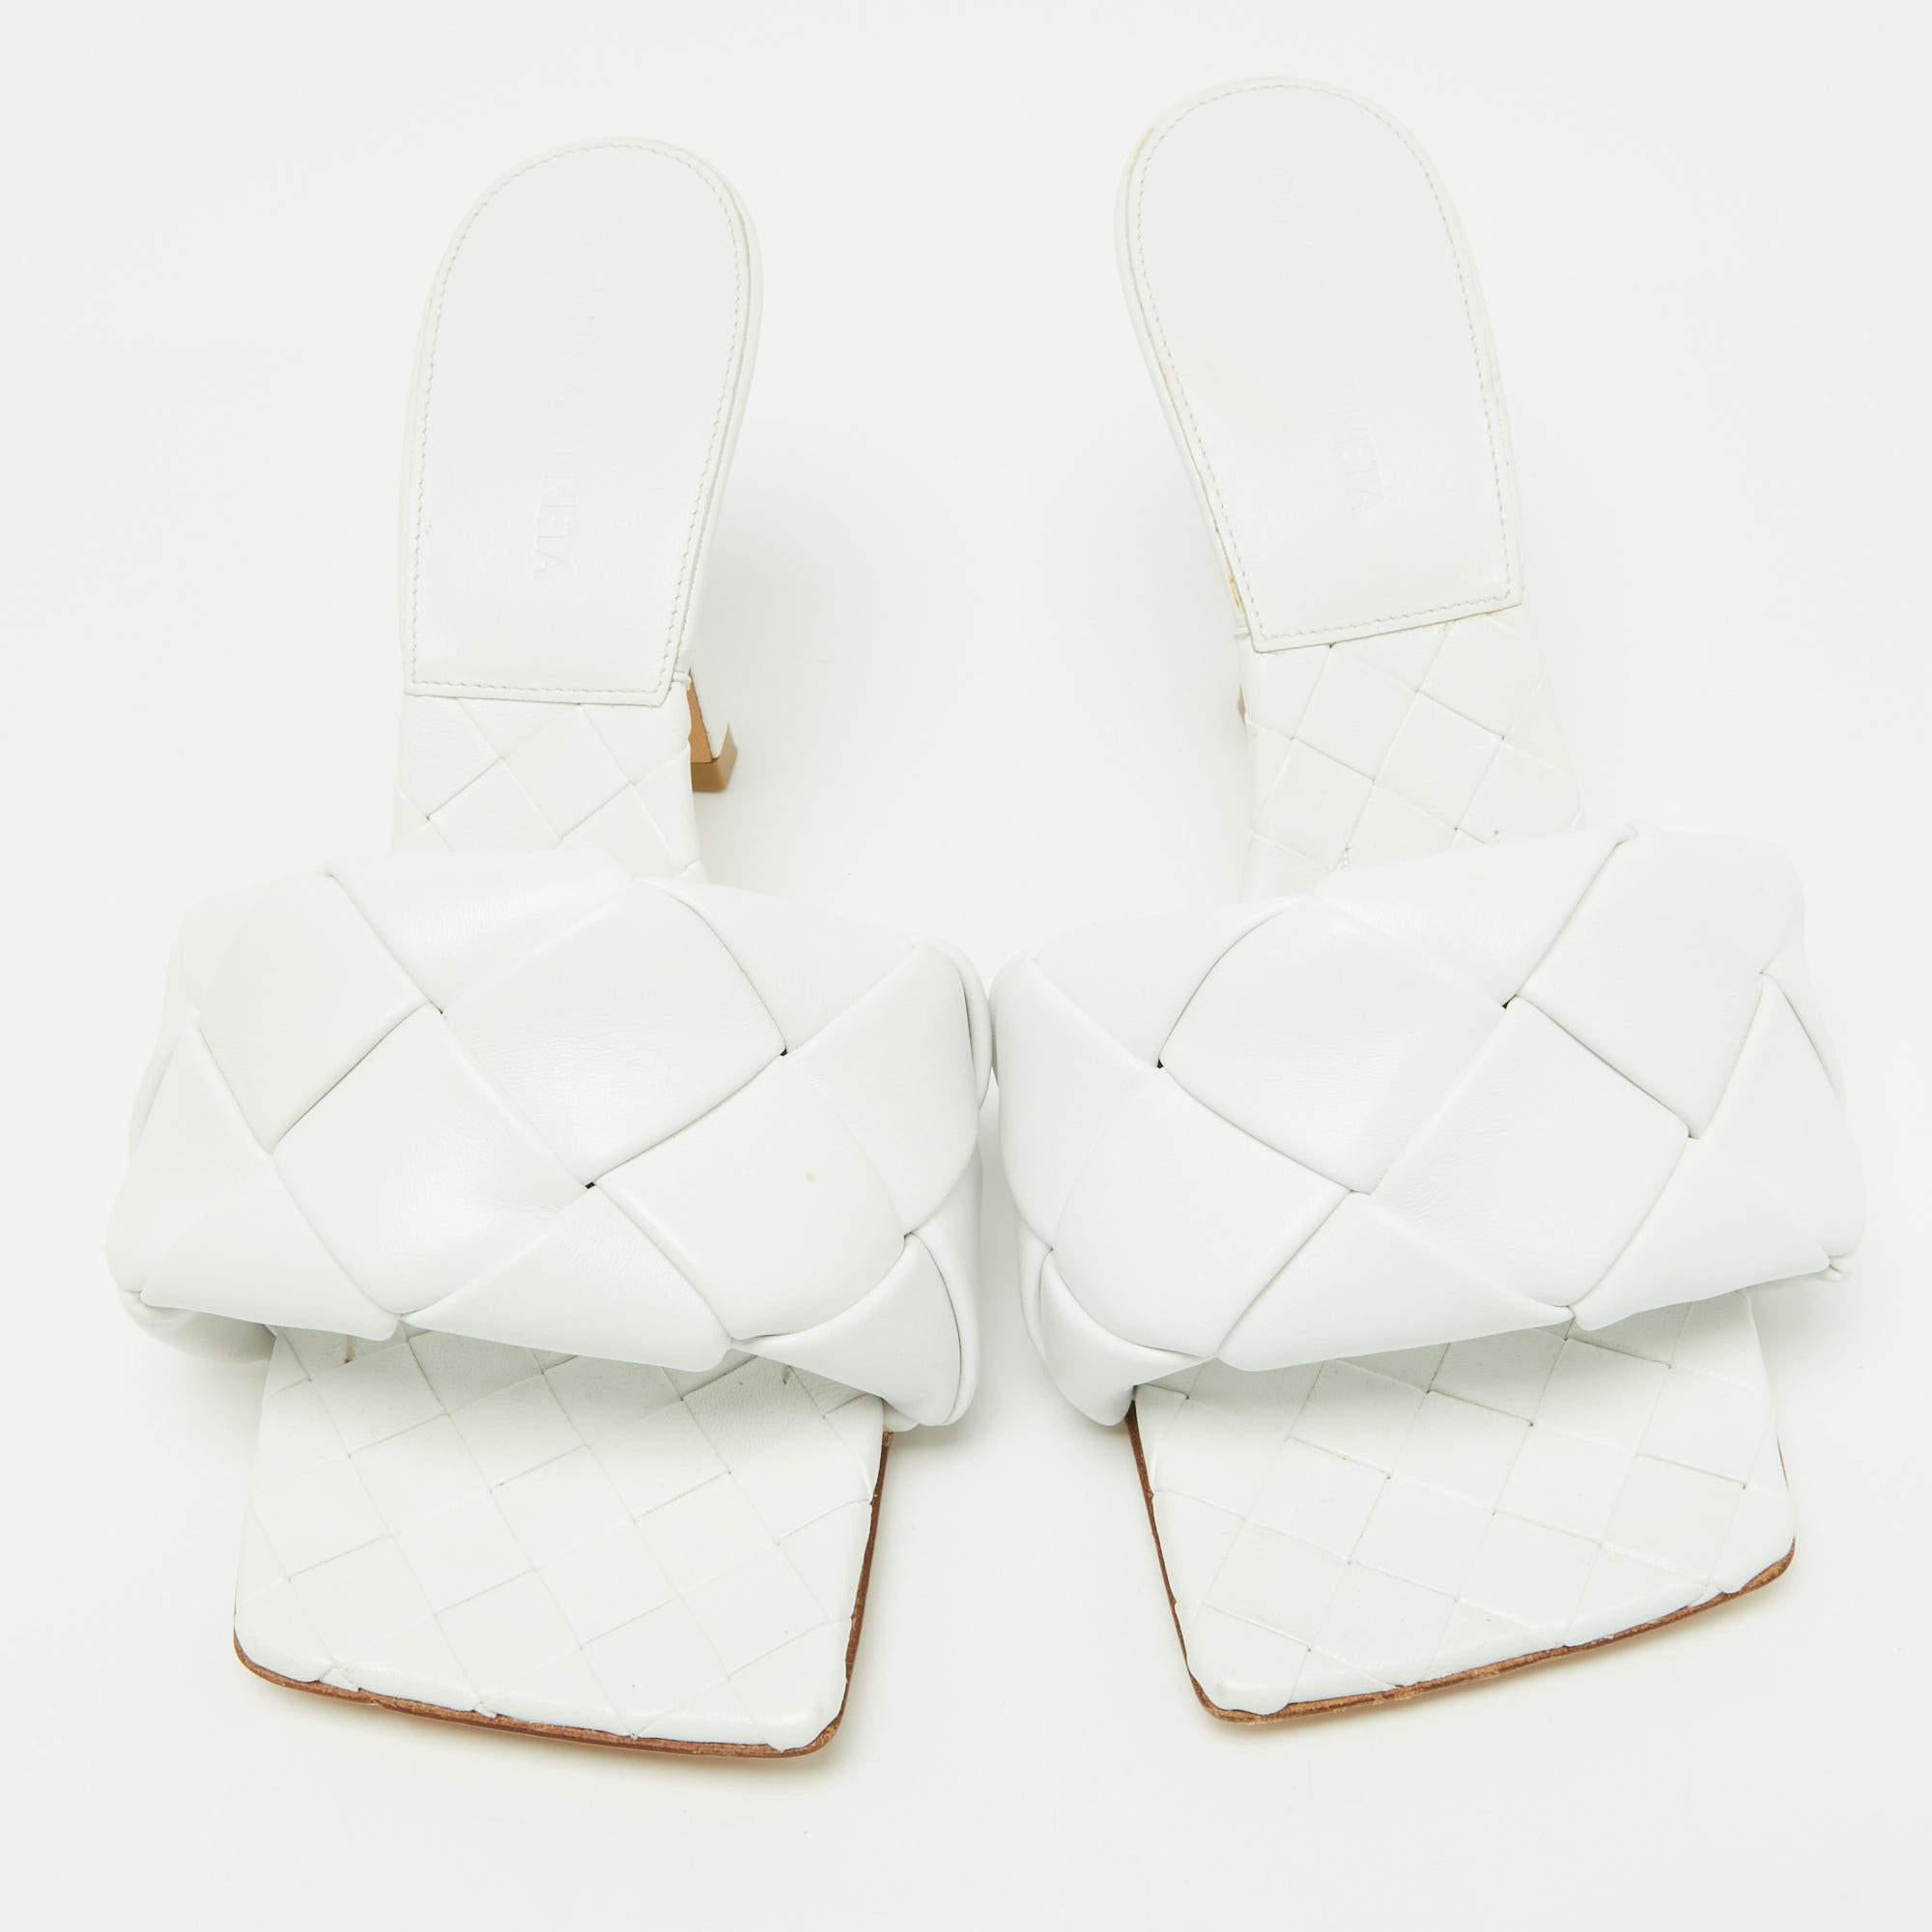 Bottega Veneta's list of trend-setting designs is only growing, and we can guess why! From the Lido sandals to the Pouch, the brand's offerings are anything but ordinary. We have here these amazing Lido slides, made from white leather. The